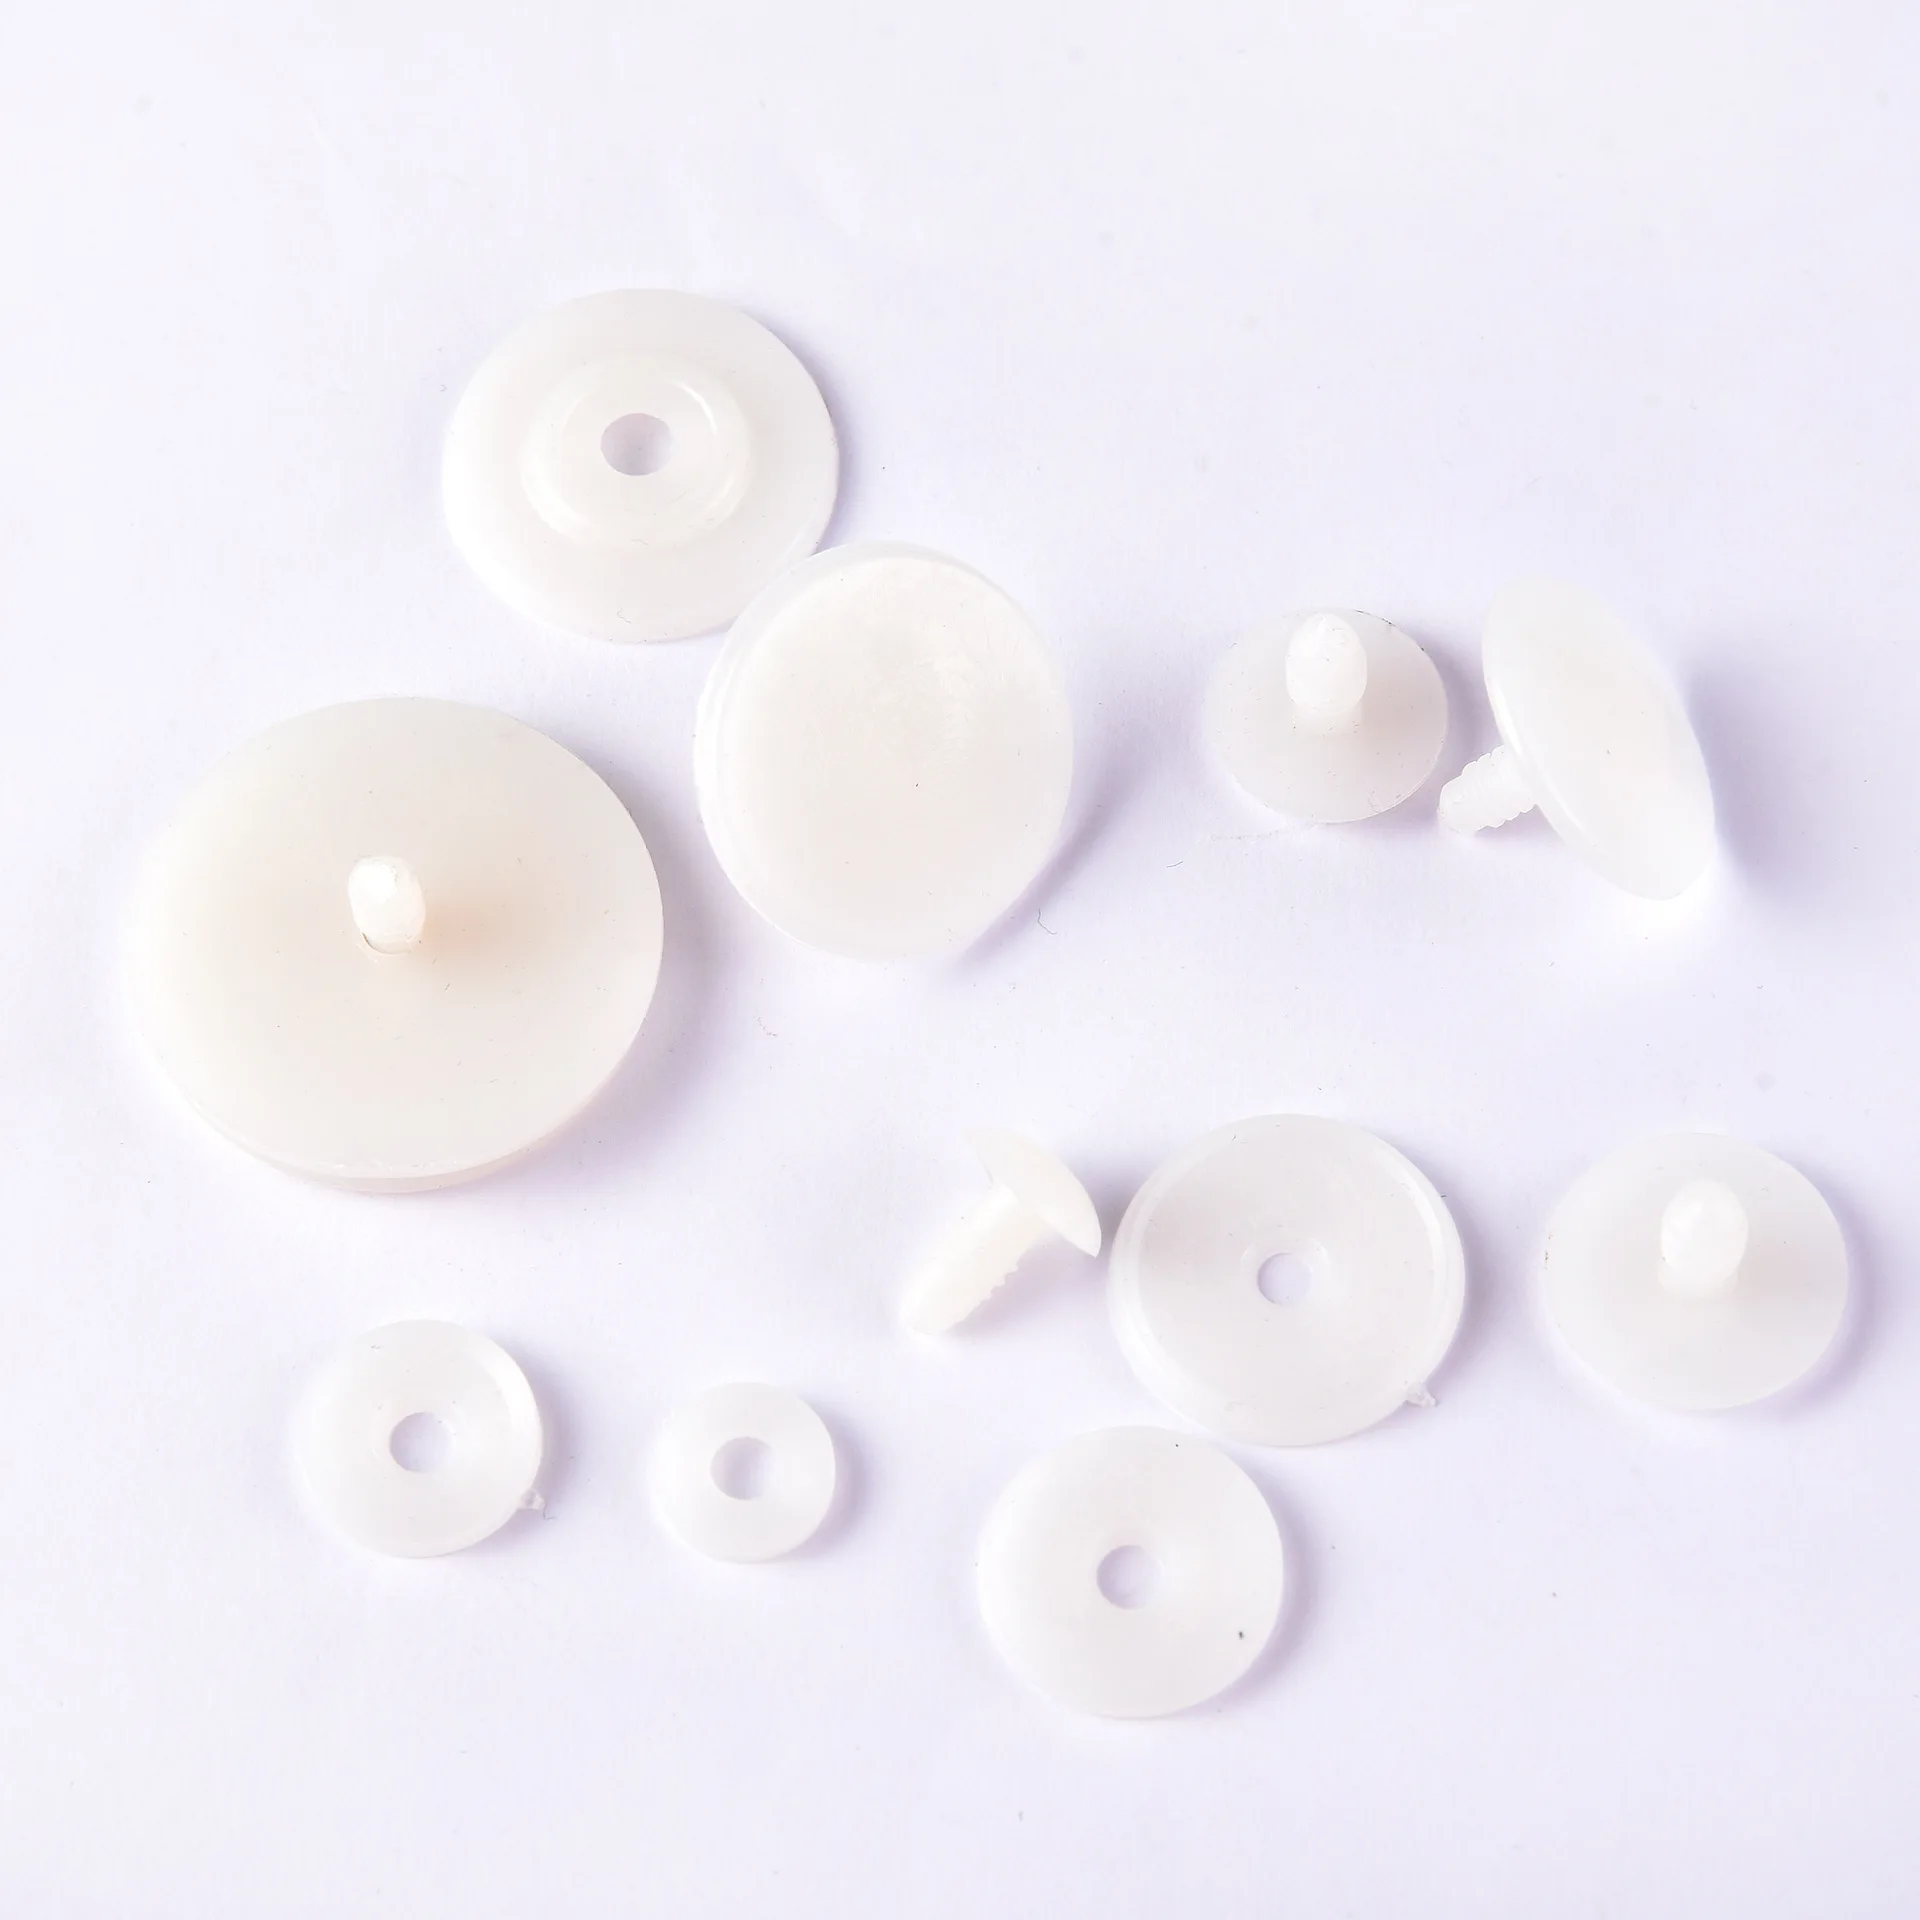 45mm White Plastic Safety Doll Joints x 5 Bear Doll Soft Toy Making 